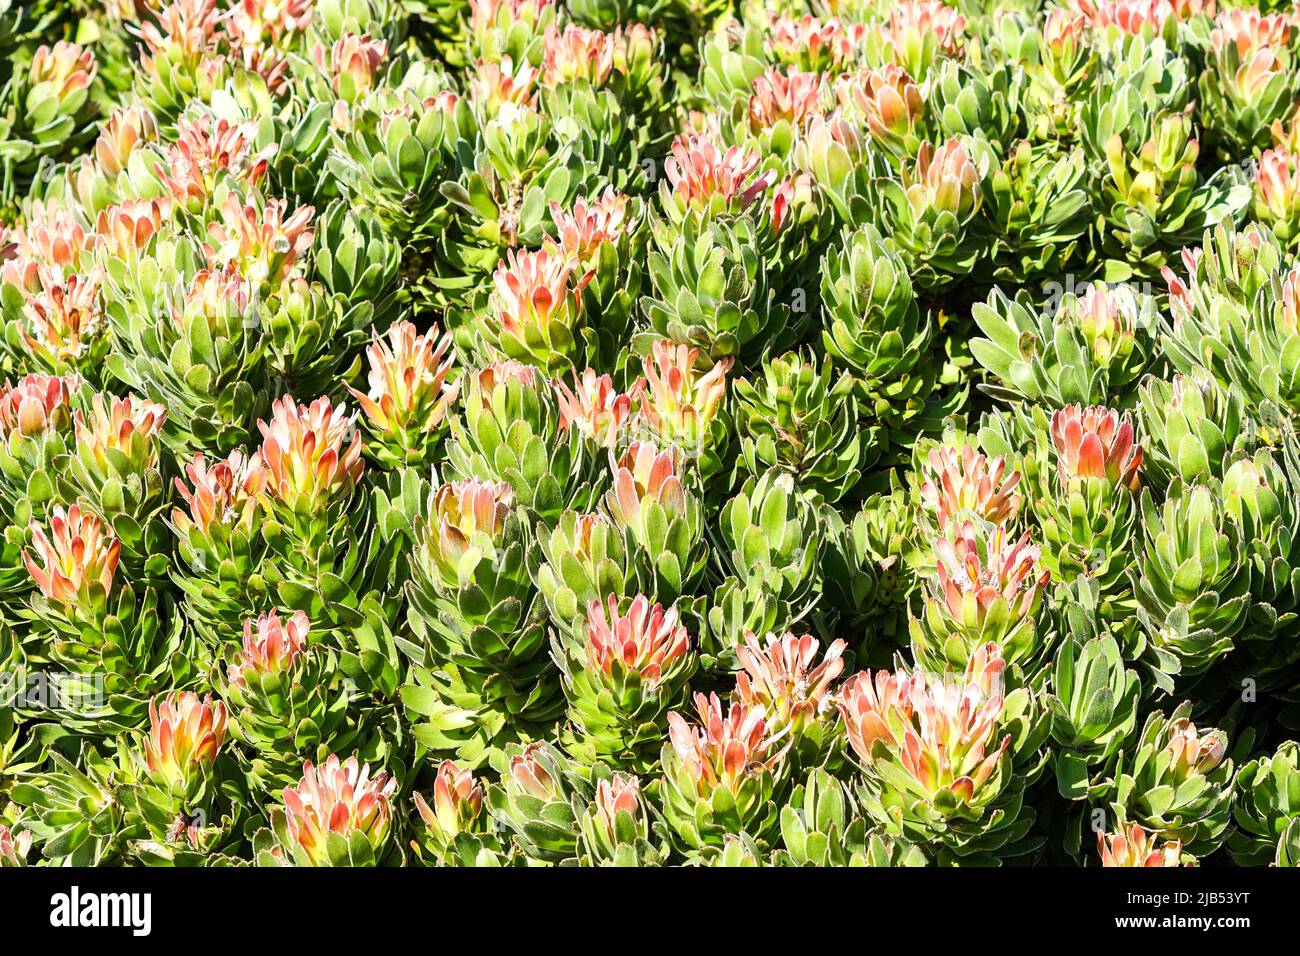 closeup of a protea bush in Winter showing green leaves, red petals on flowers in the wild of Western Cape, South Africa, abstract nature background Stock Photo